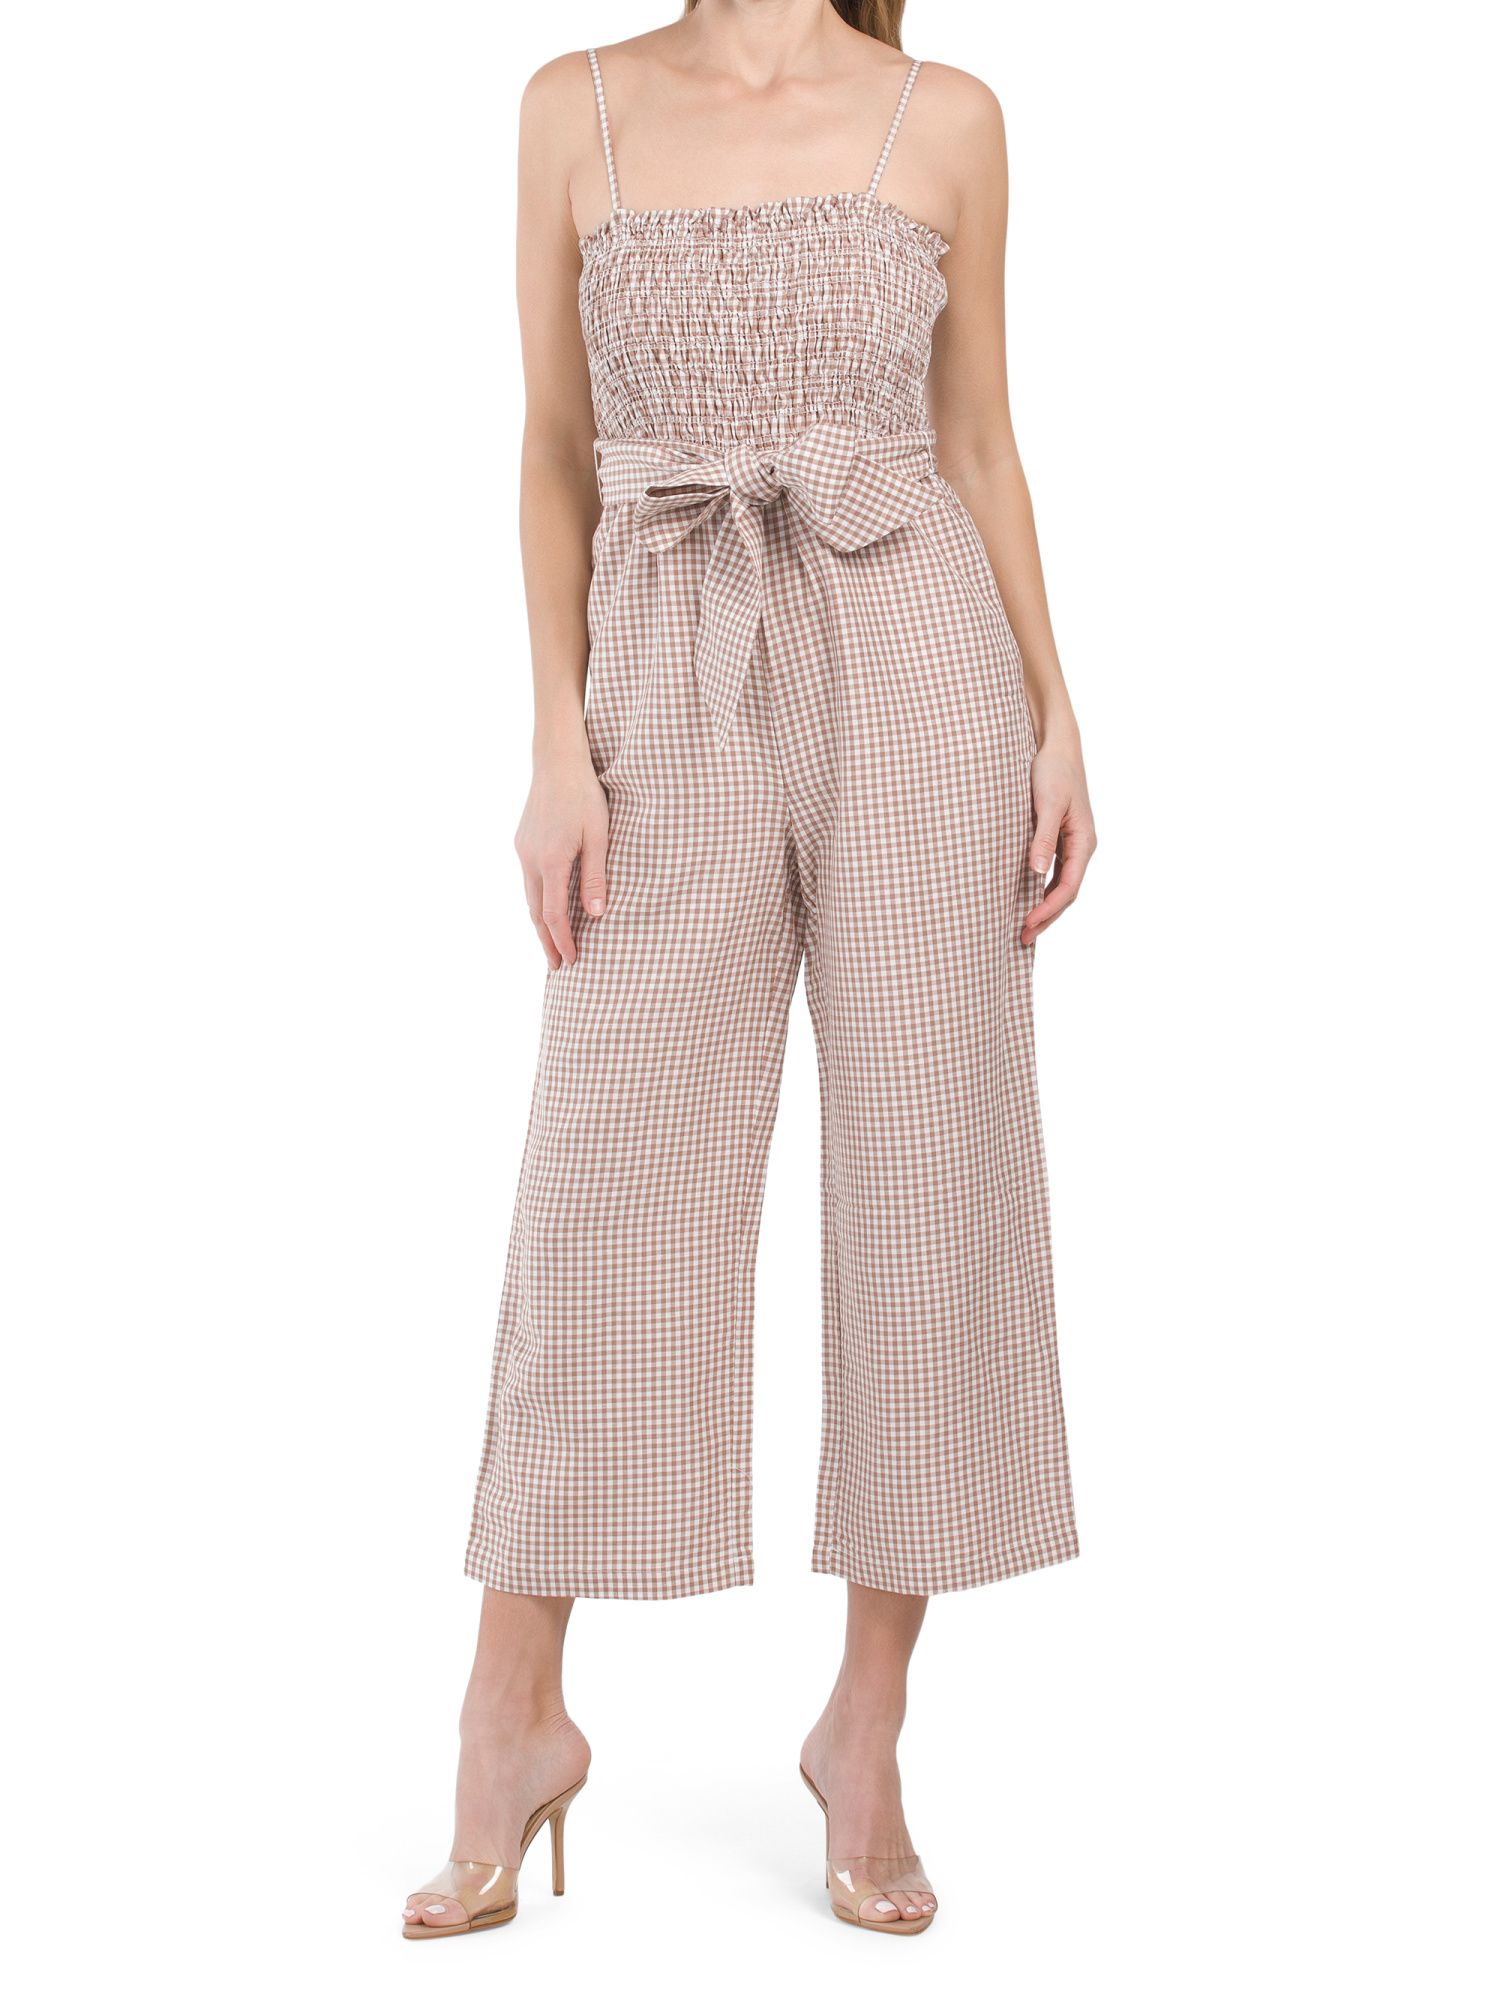 Linen Smocked Top Jumpsuit With Tie Waist | TJ Maxx